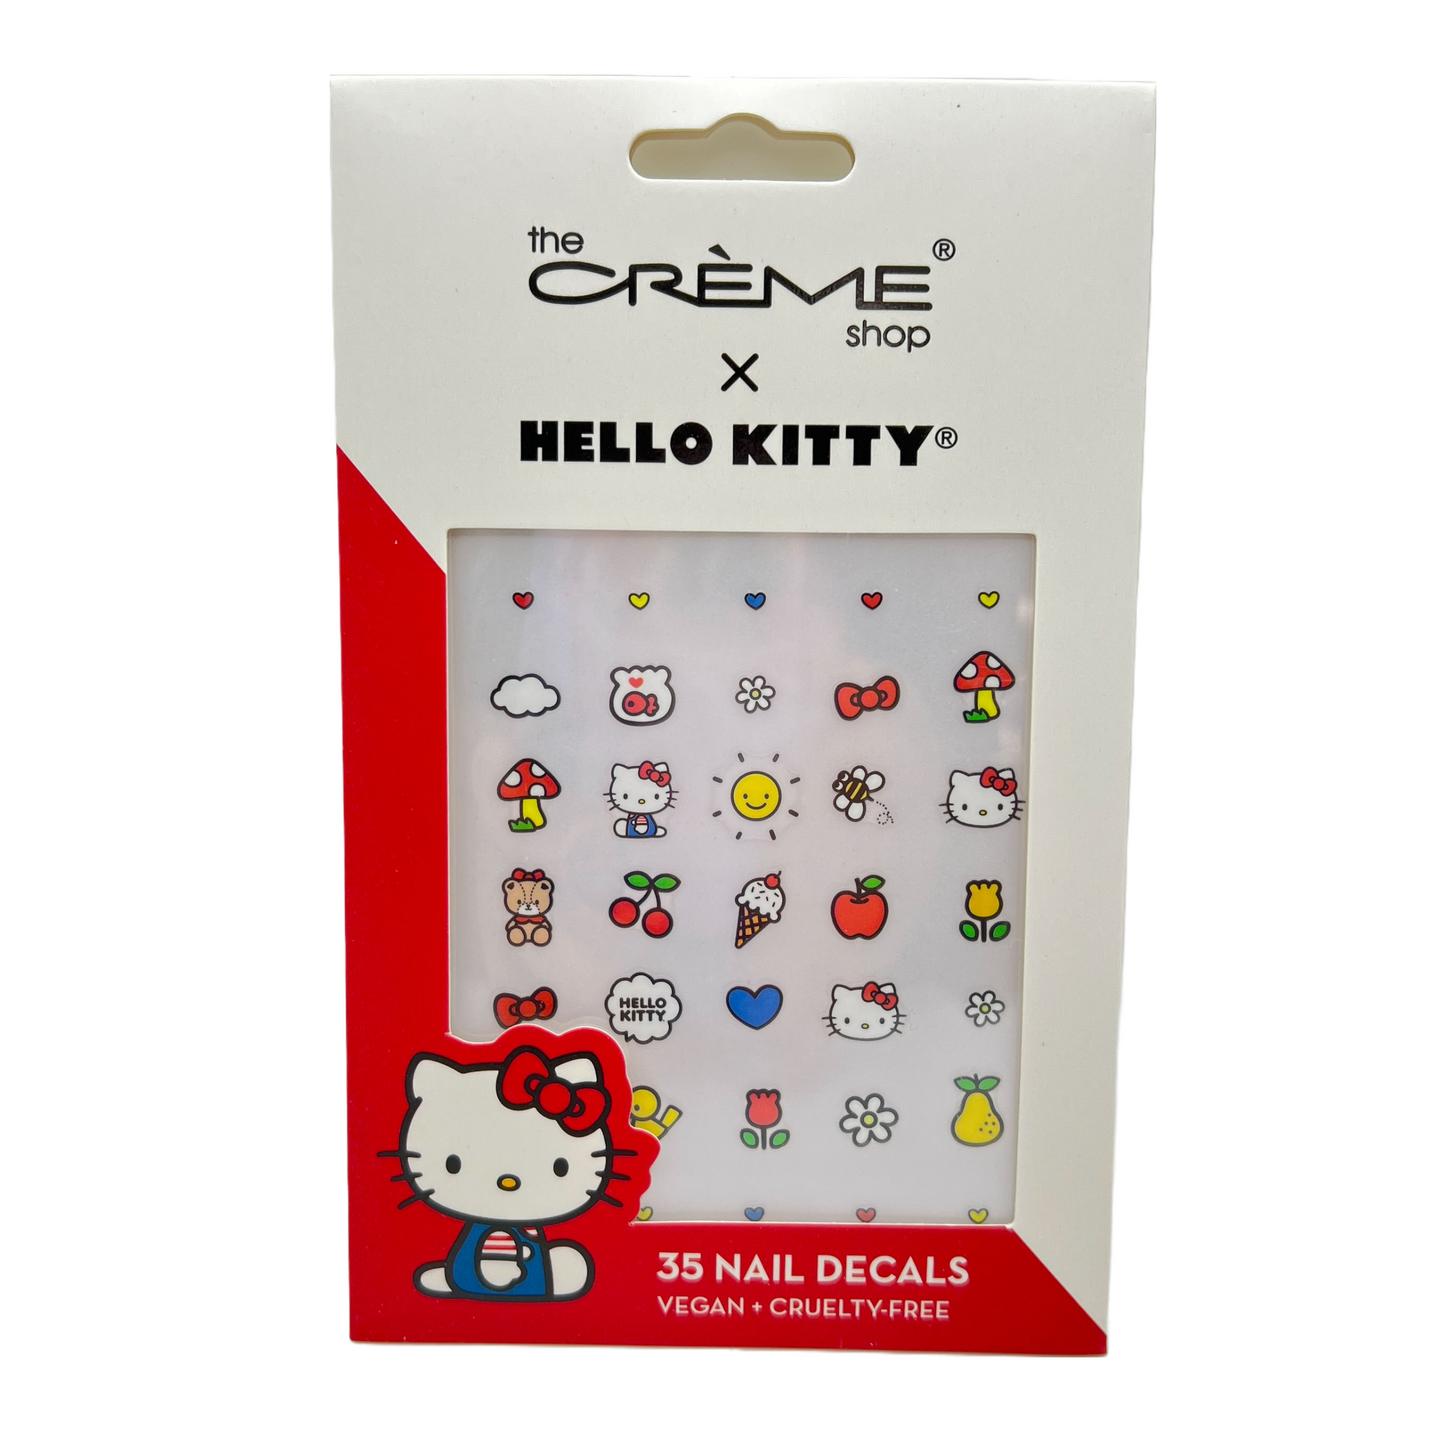 HELLO KITTY 35 NAIL DECALS CLASSIC